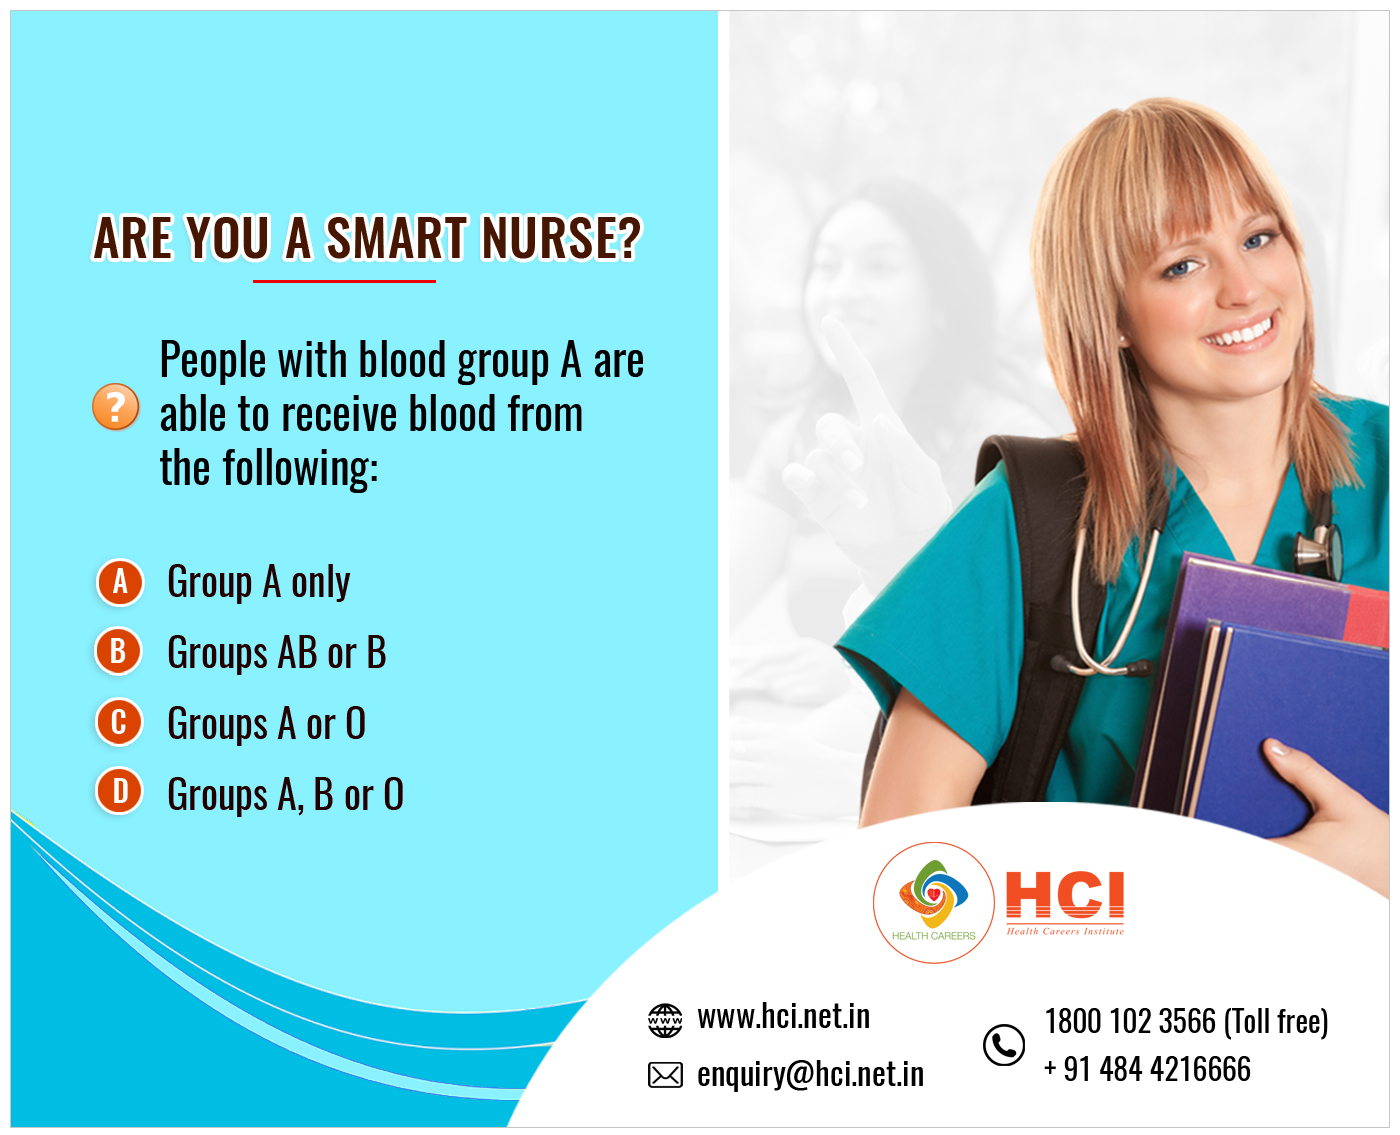 People with blood group A are able to receive blood from the following